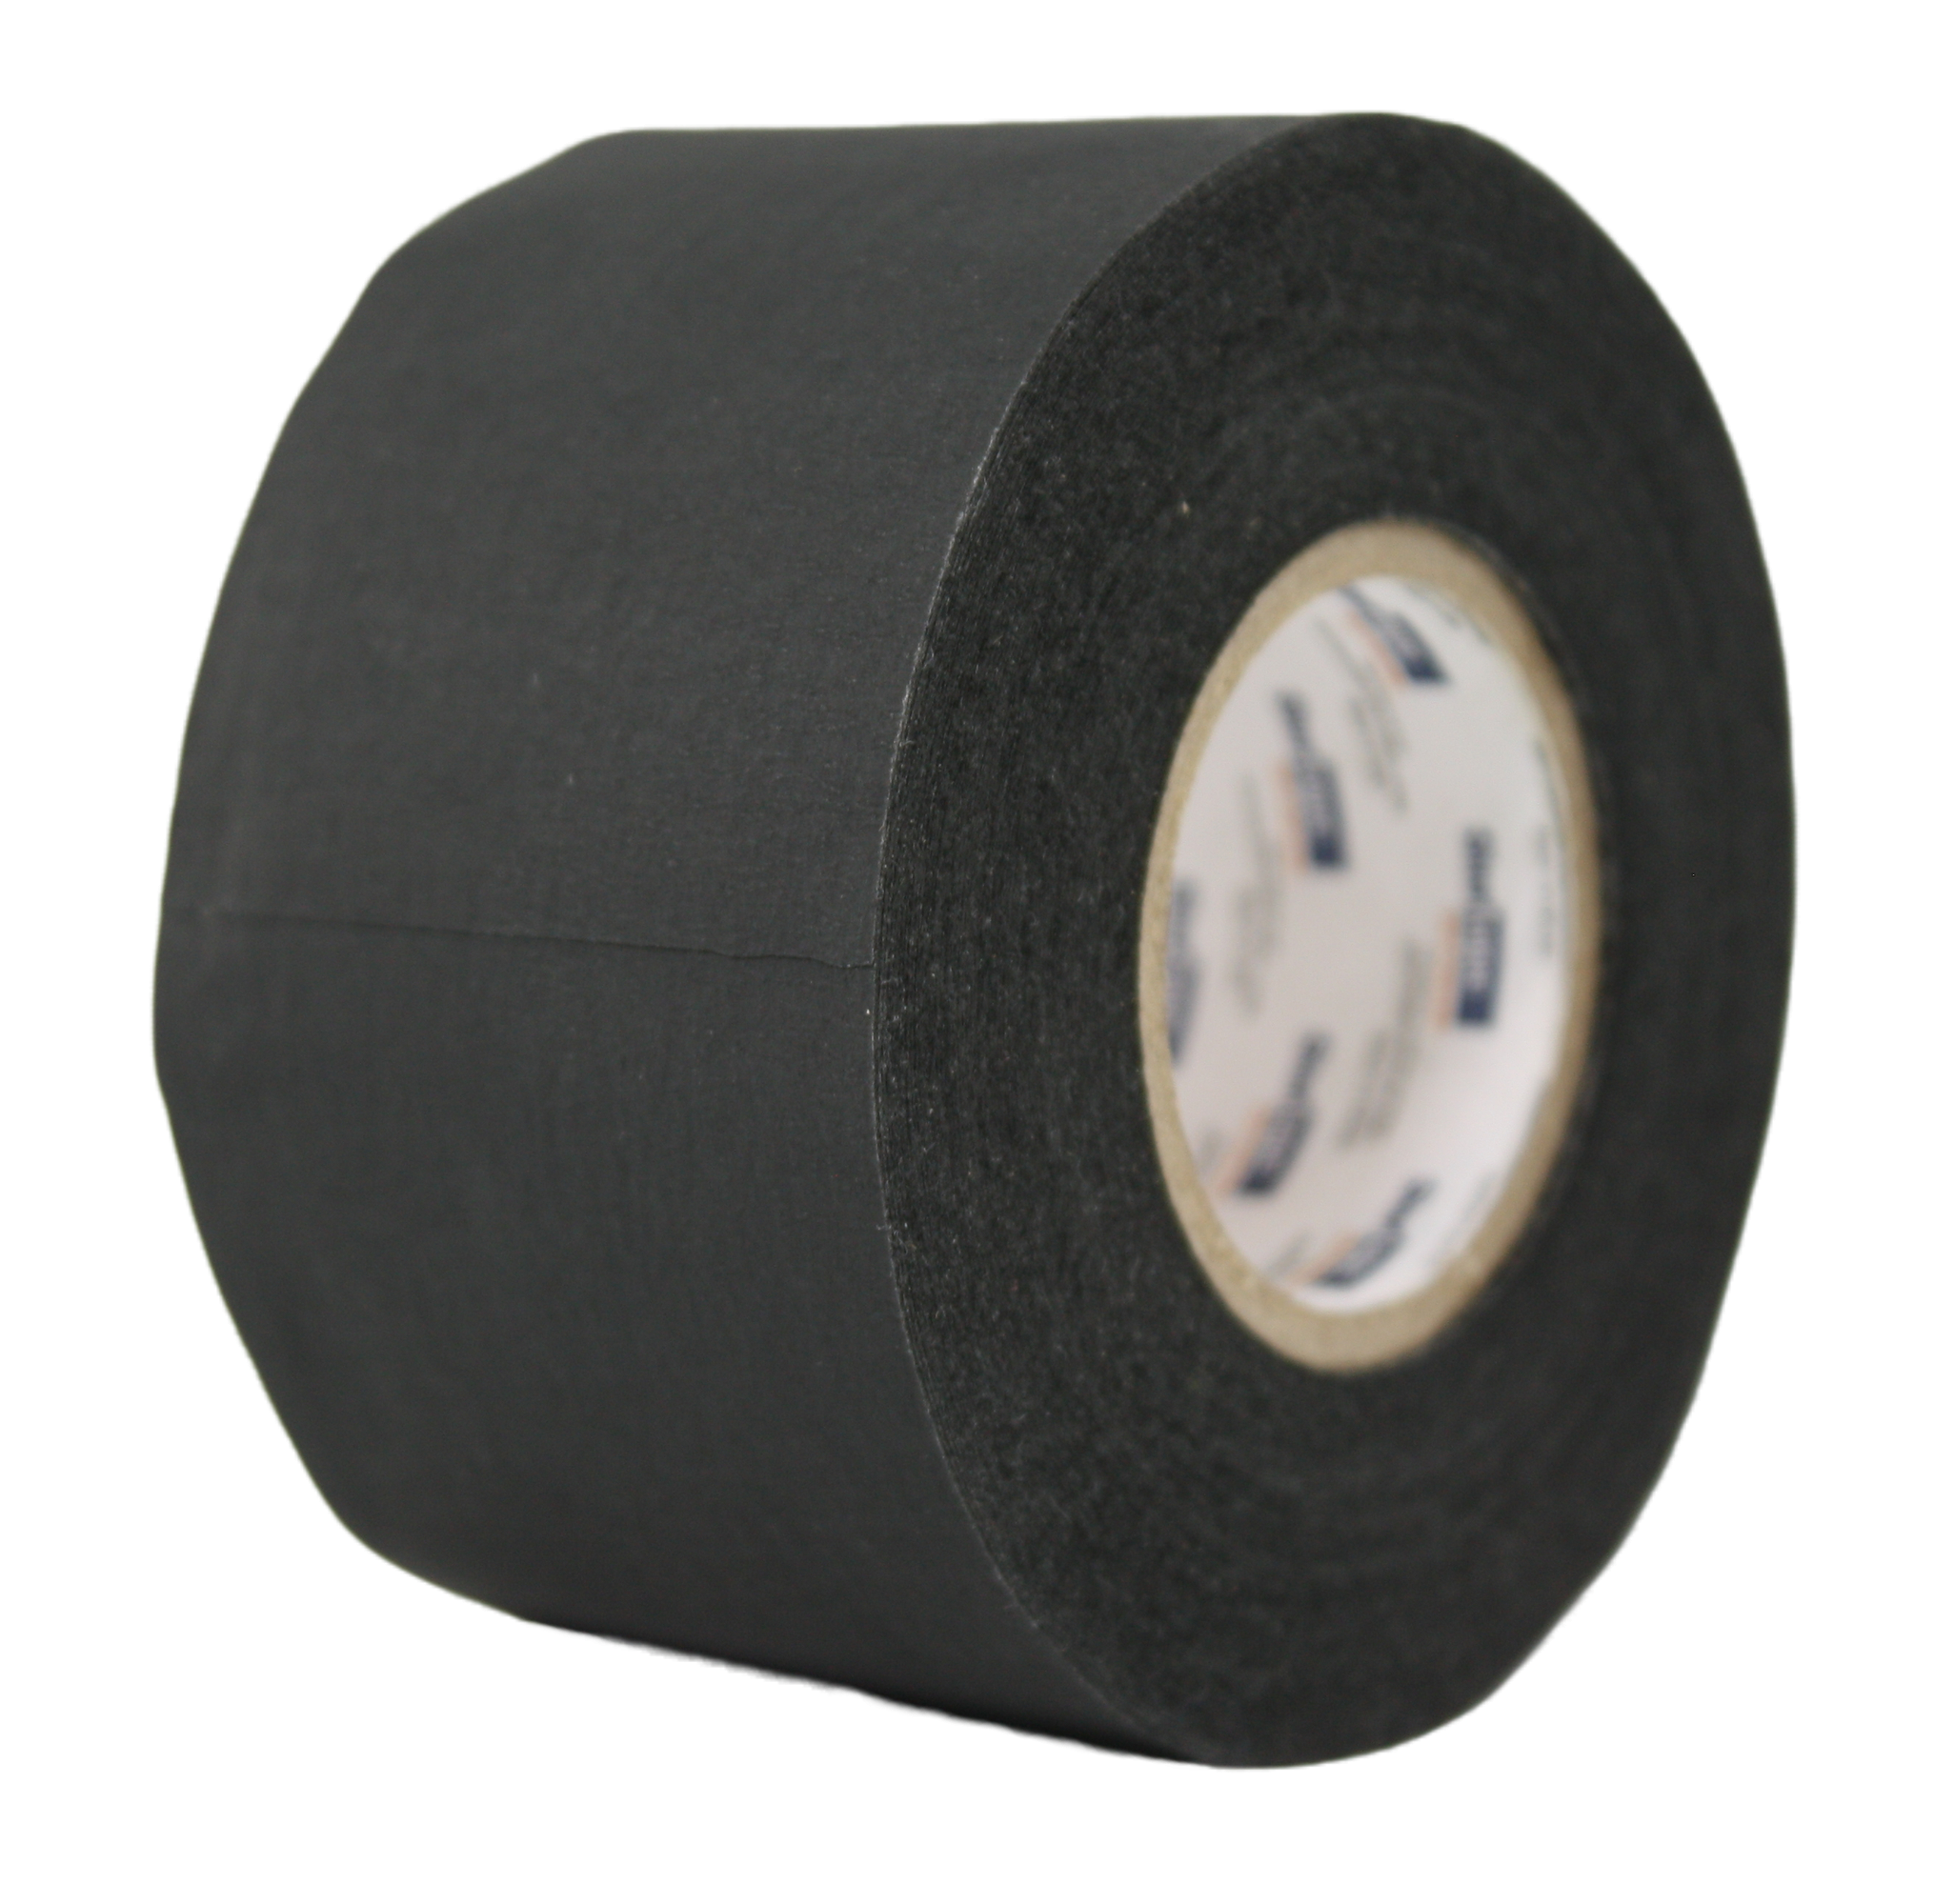 Shurtape CP-743 Matte Photo Tape, 2", small core roll, side view, with a focus on the texture of the tape